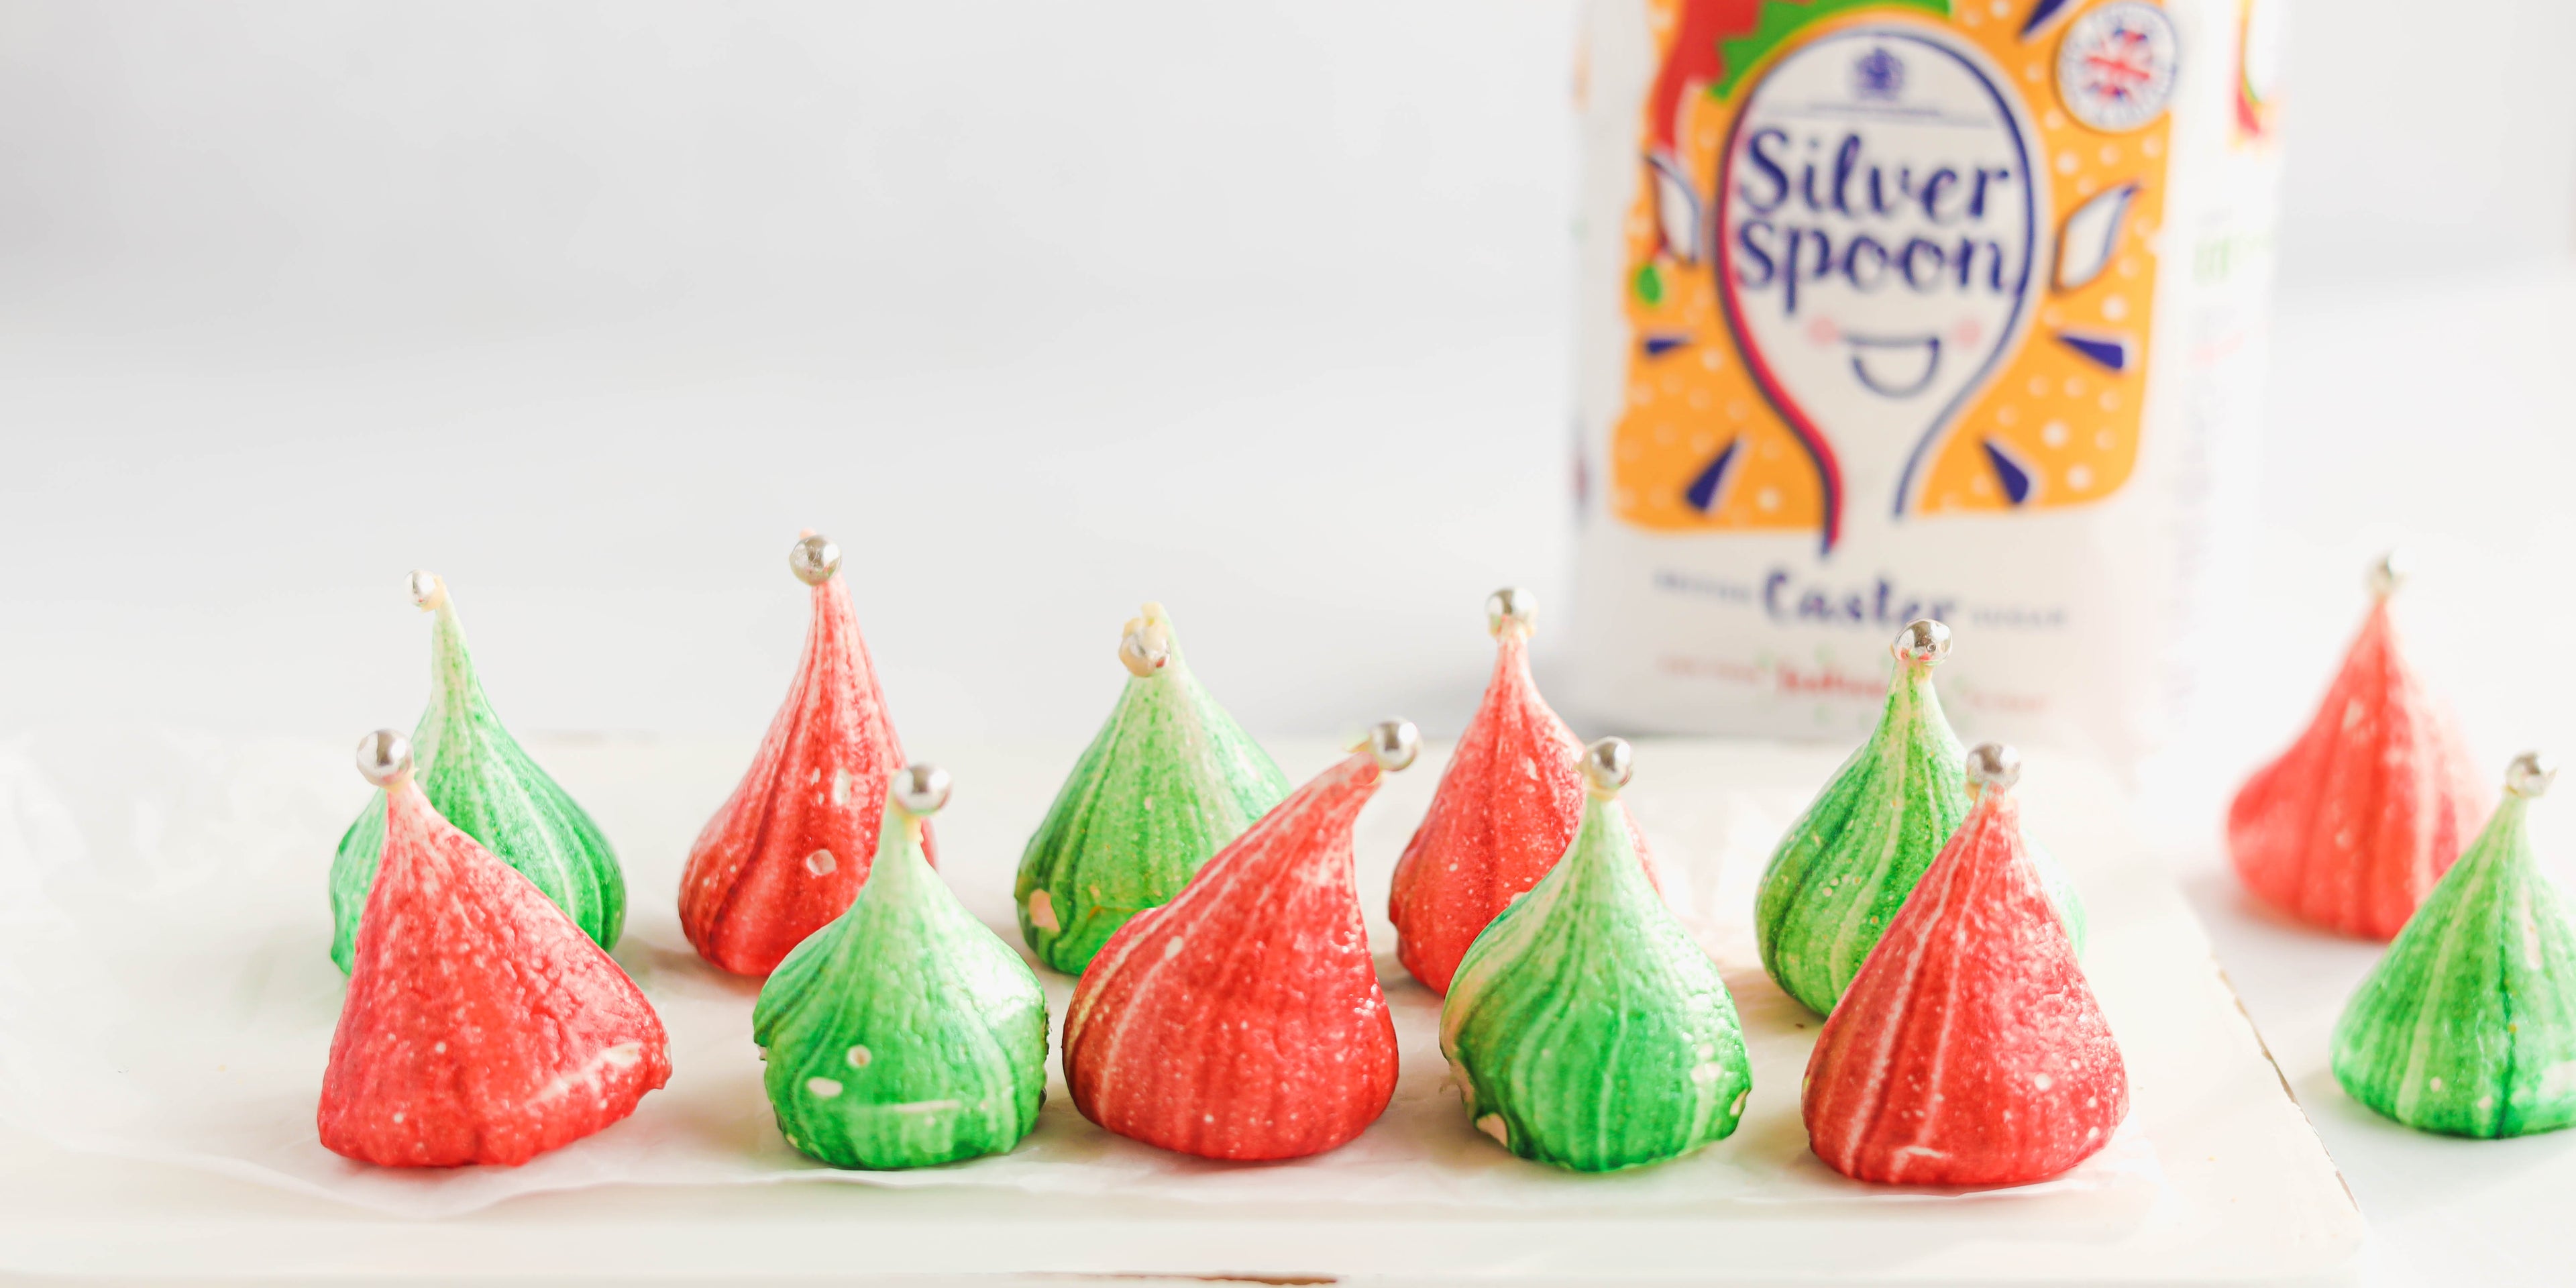 Red and green Rainbow Meringues on parchment paper with silver spoon caster sugar pack in the background